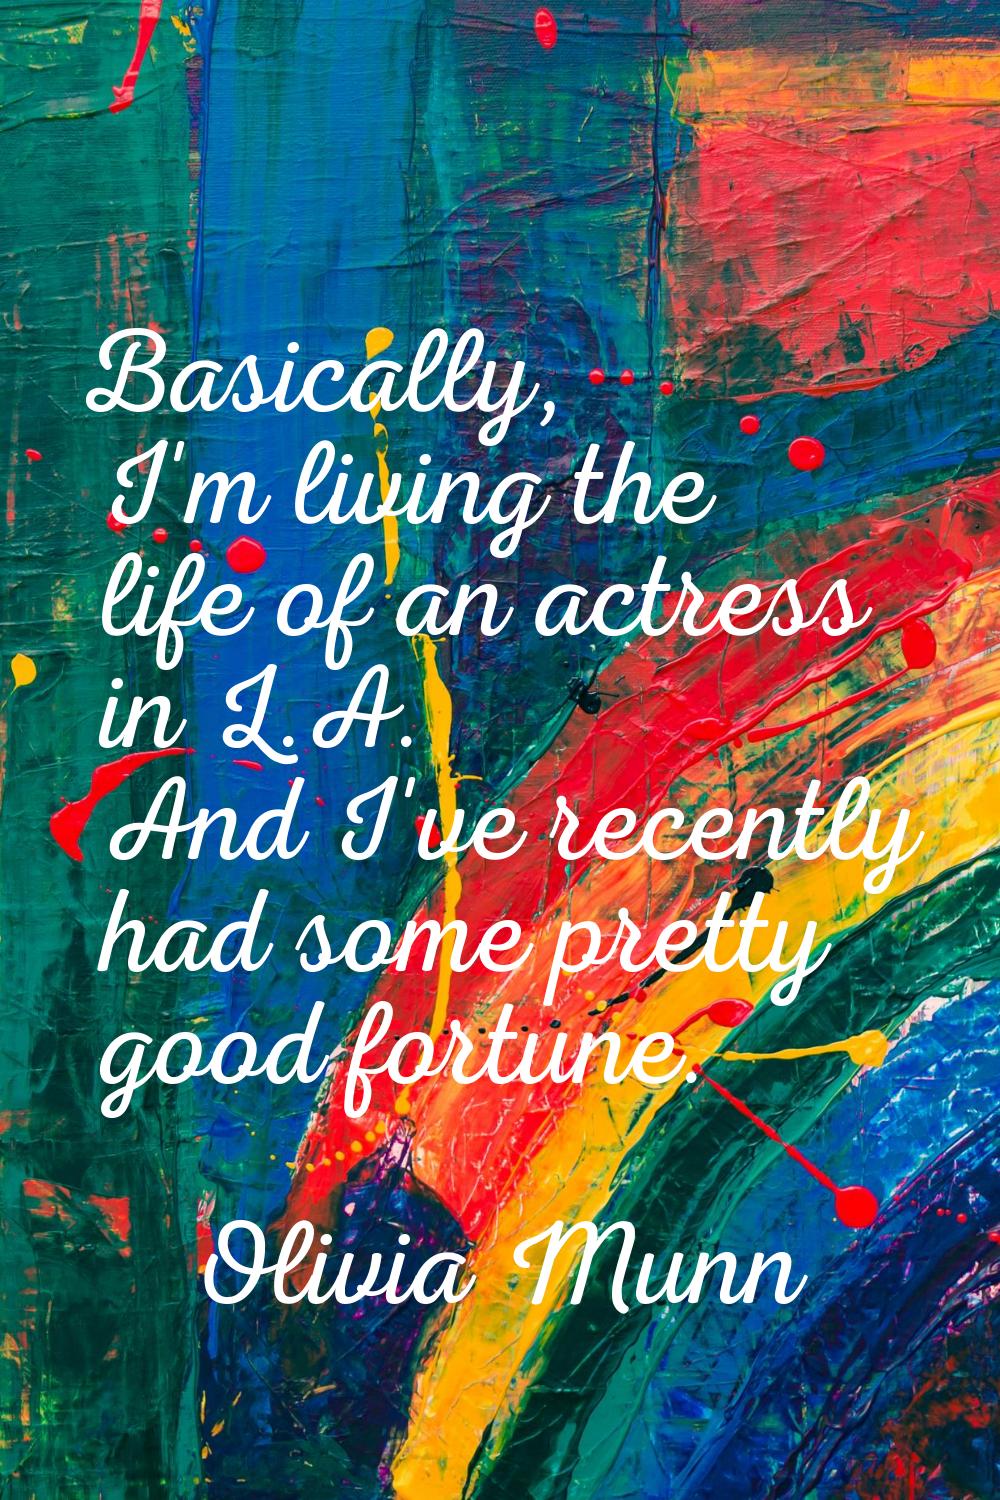 Basically, I'm living the life of an actress in L.A. And I've recently had some pretty good fortune